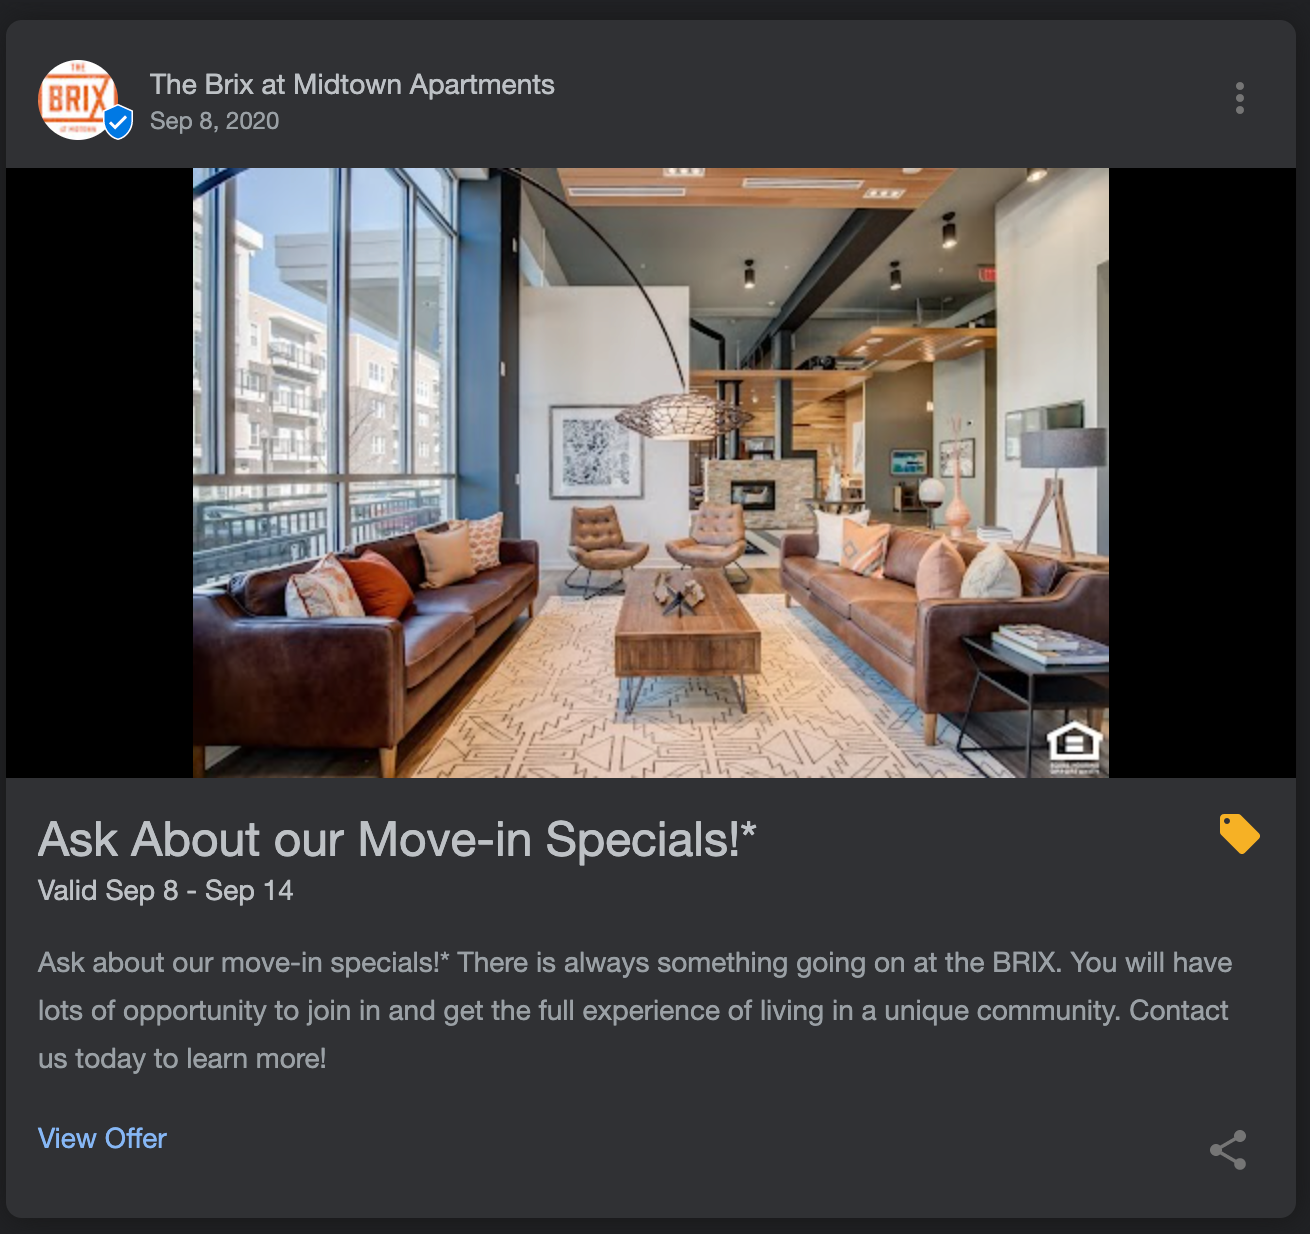 A screenshot of a Google Business Profile post offering move in specials